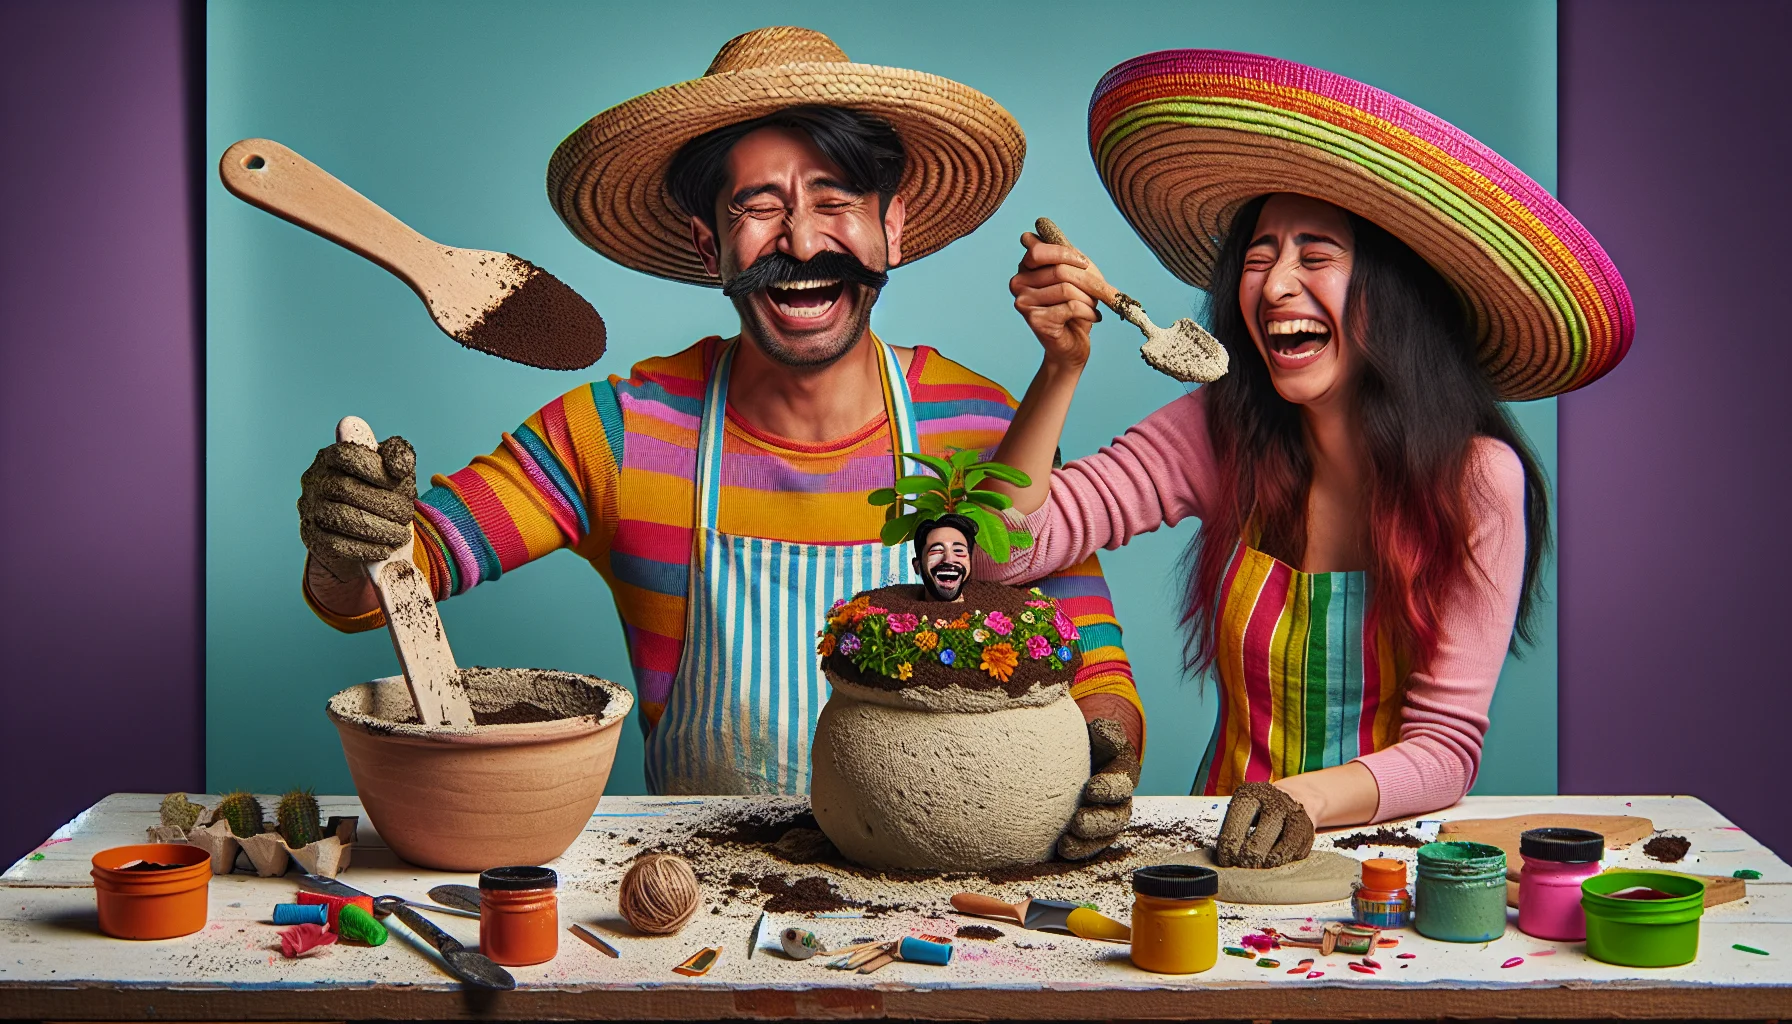 Create a humorous and quirky scene of gardening enthusiasts carefully crafting Hypertufa Planters. Envision a male gardener of South Asian descent, wearing a straw hat and bright stripes, comically having a tiny plant growing out of his hat. On the other side, picture a Hispanic female gardener laughing heartily while mixing the Hypertufa with an oversized wooden spoon. Make the atmosphere lively and colourful, with a mishap of seeds spilled over the table and an assortment of tools forgotten in unexpected places, such as a trowel stuck in a pot of paint, promoting the fun side of gardening.